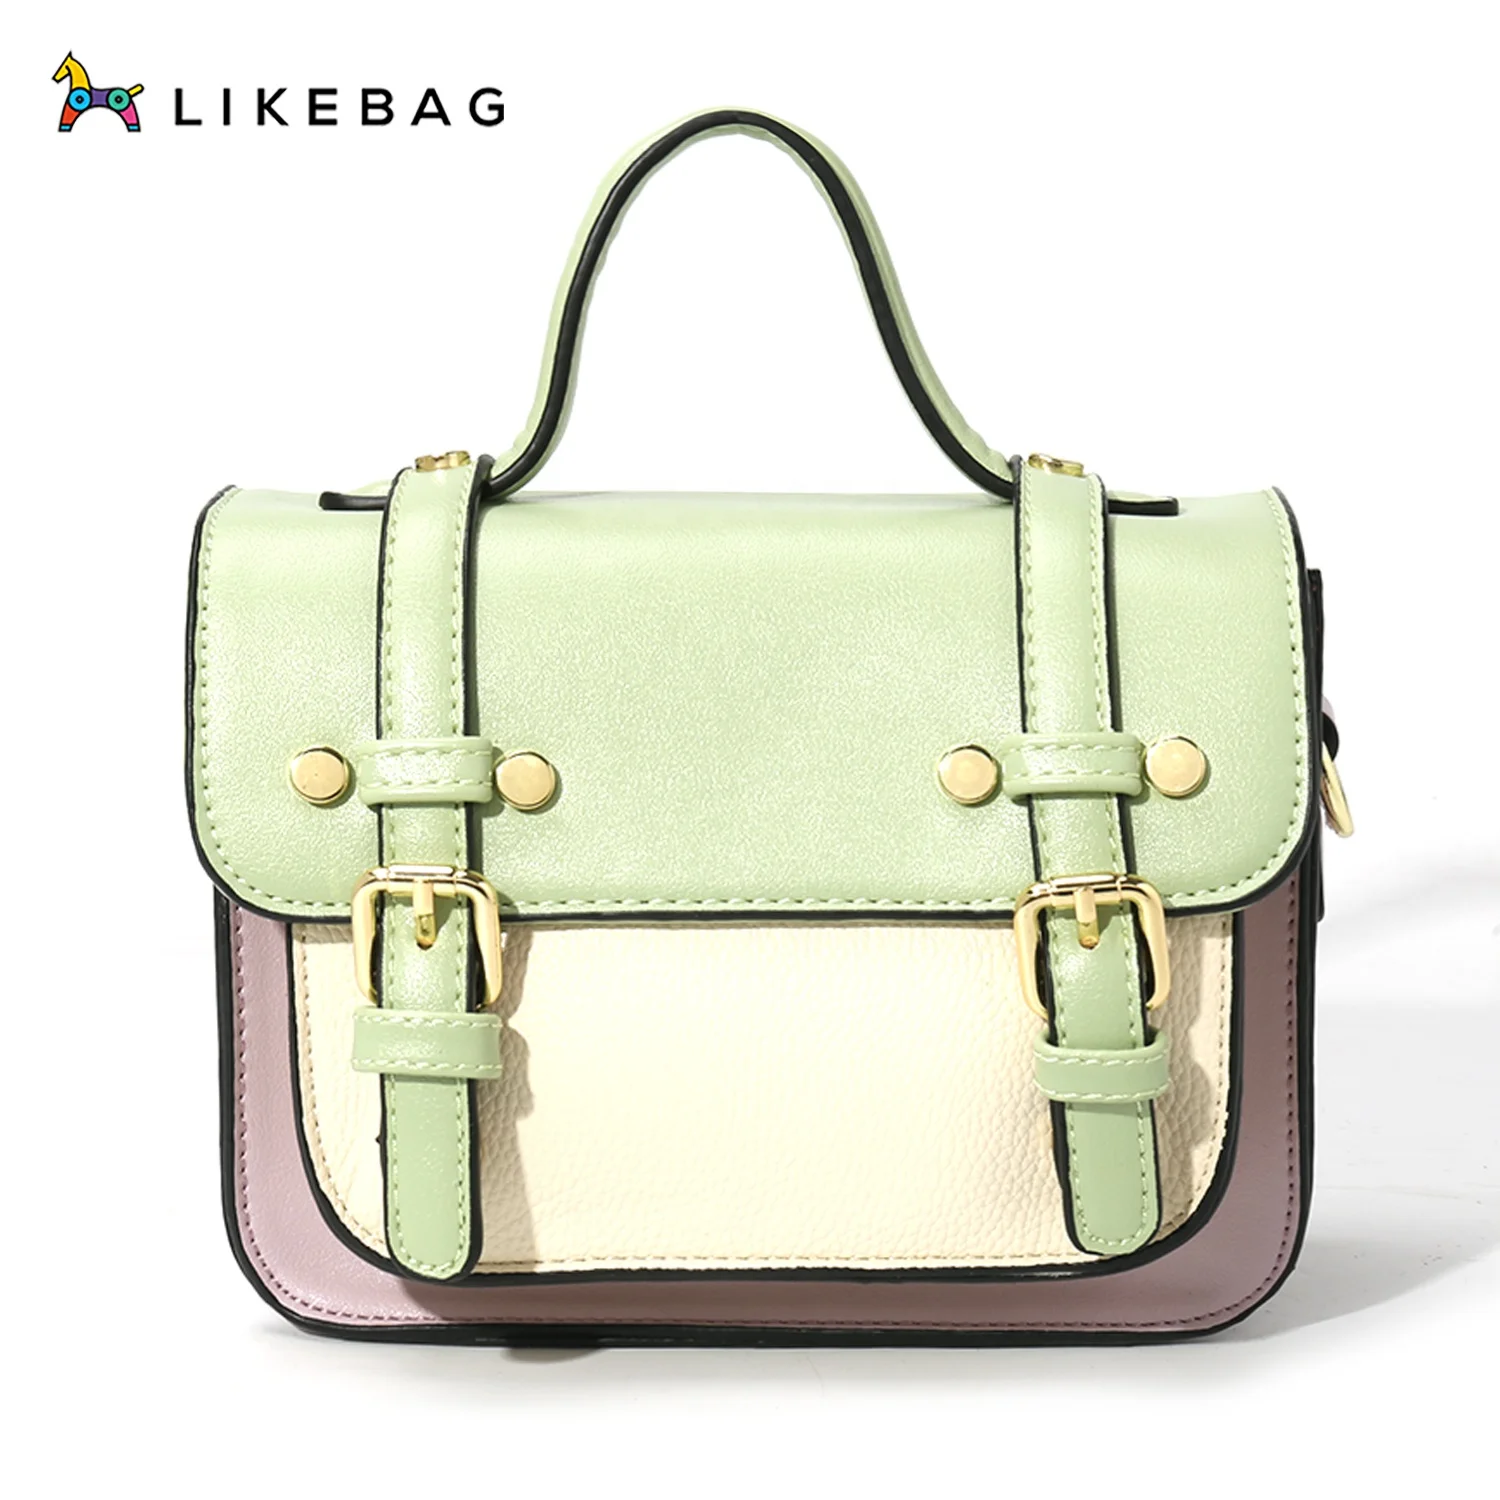 

LIKEBAG new product hot sale fashion casual college style messenger bag with color matching design